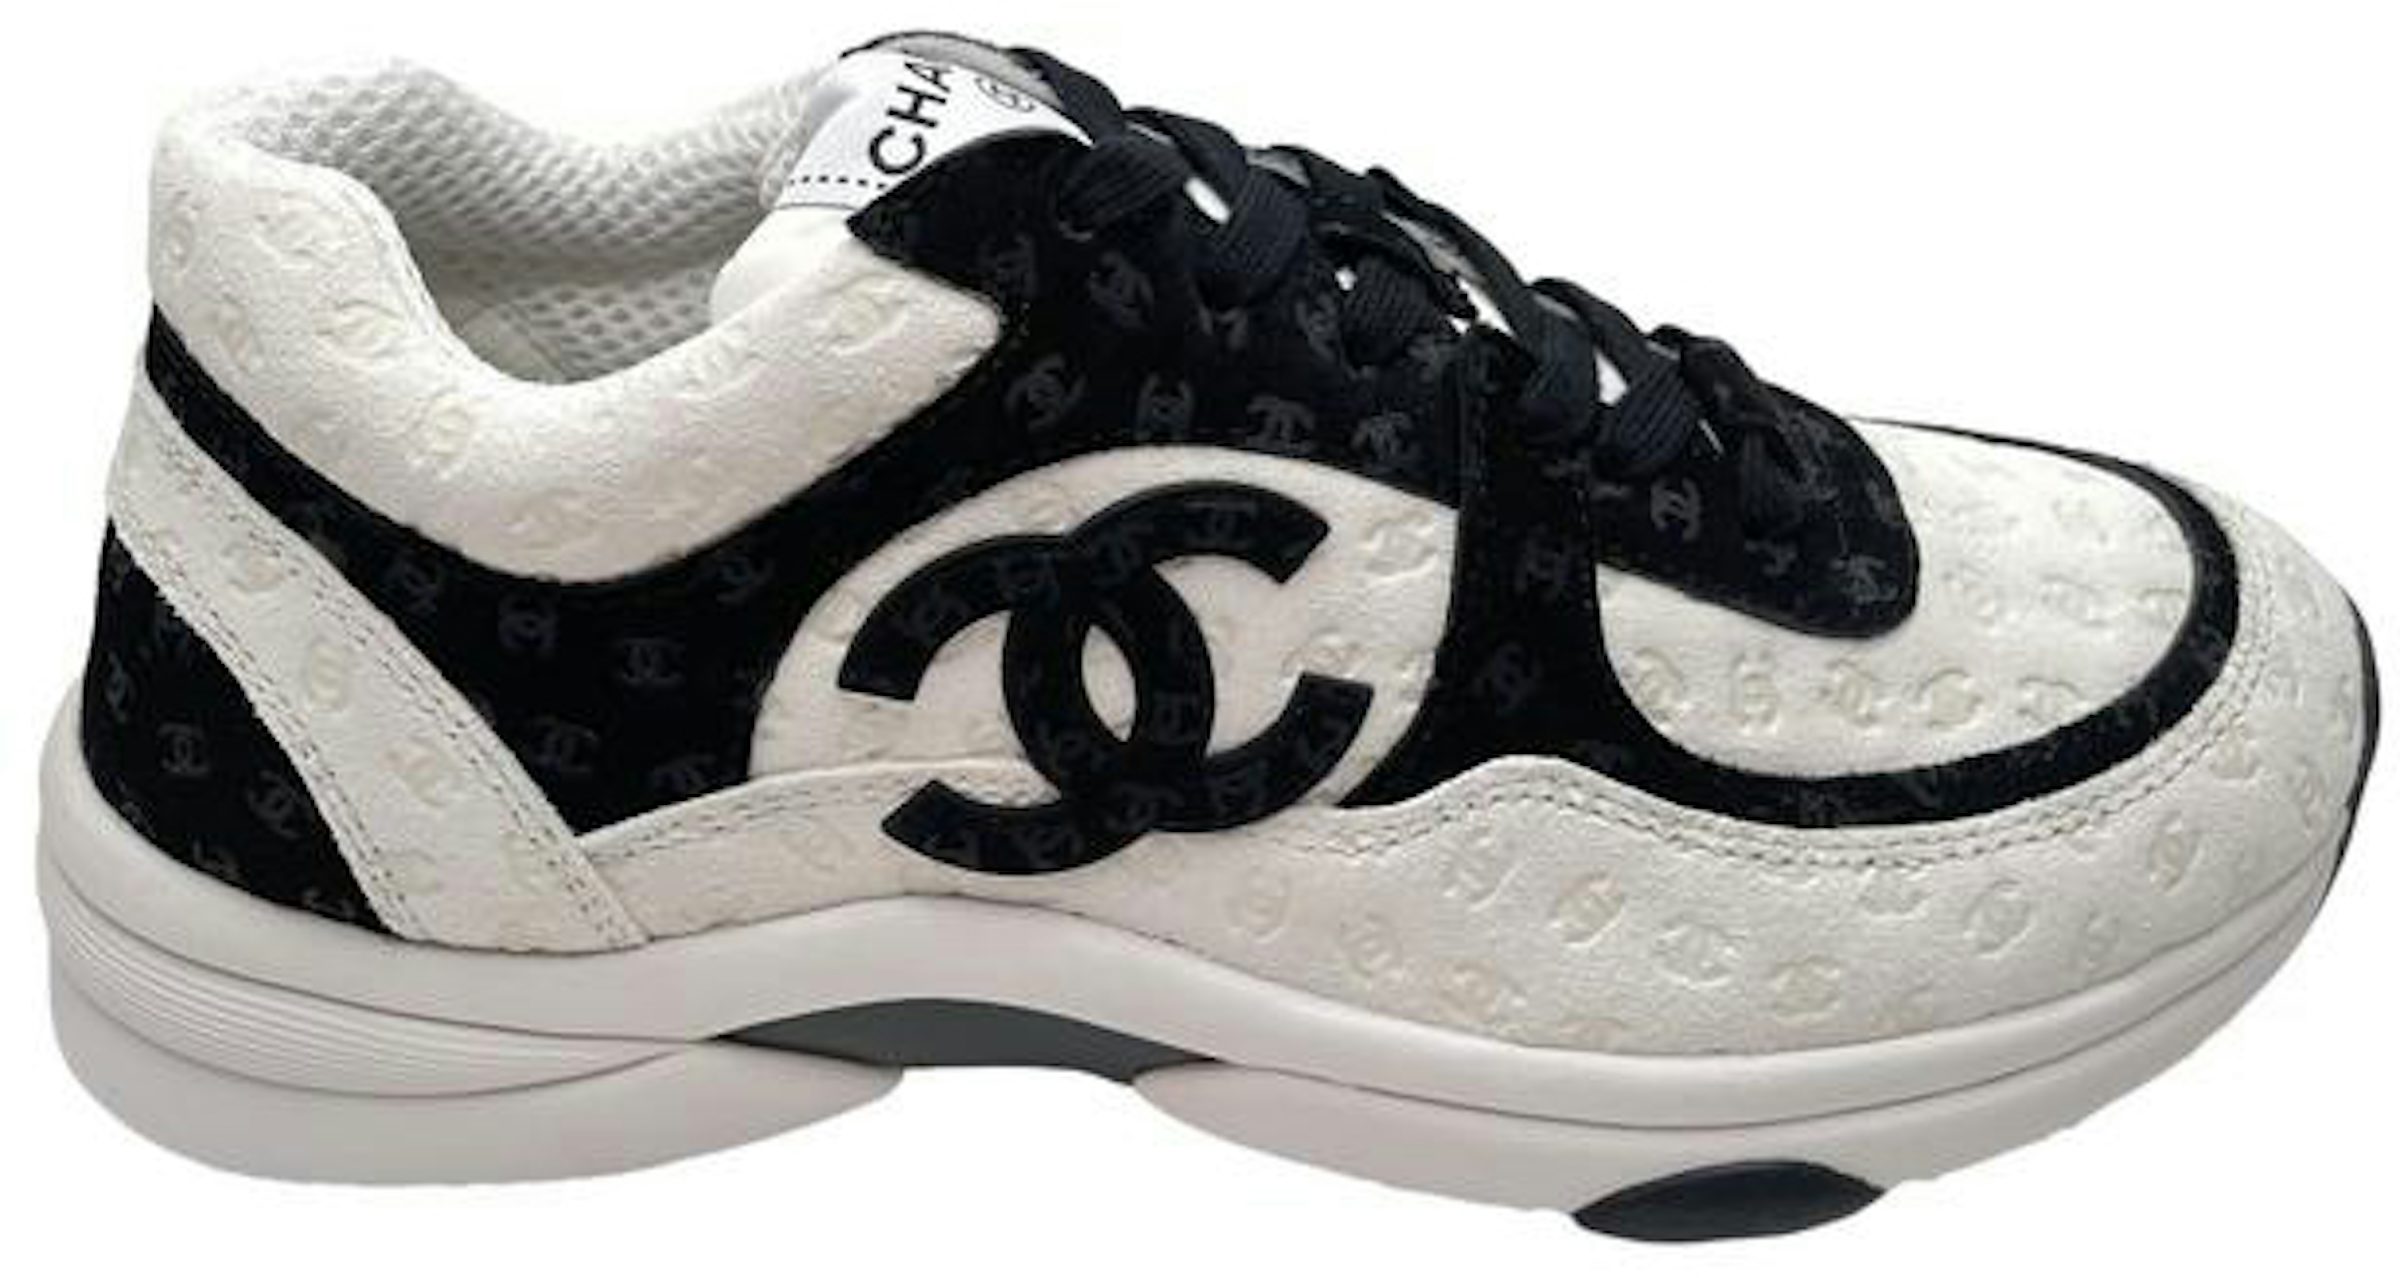 Chanel Chanel Shoes 44 low top sneaker snakers cc white